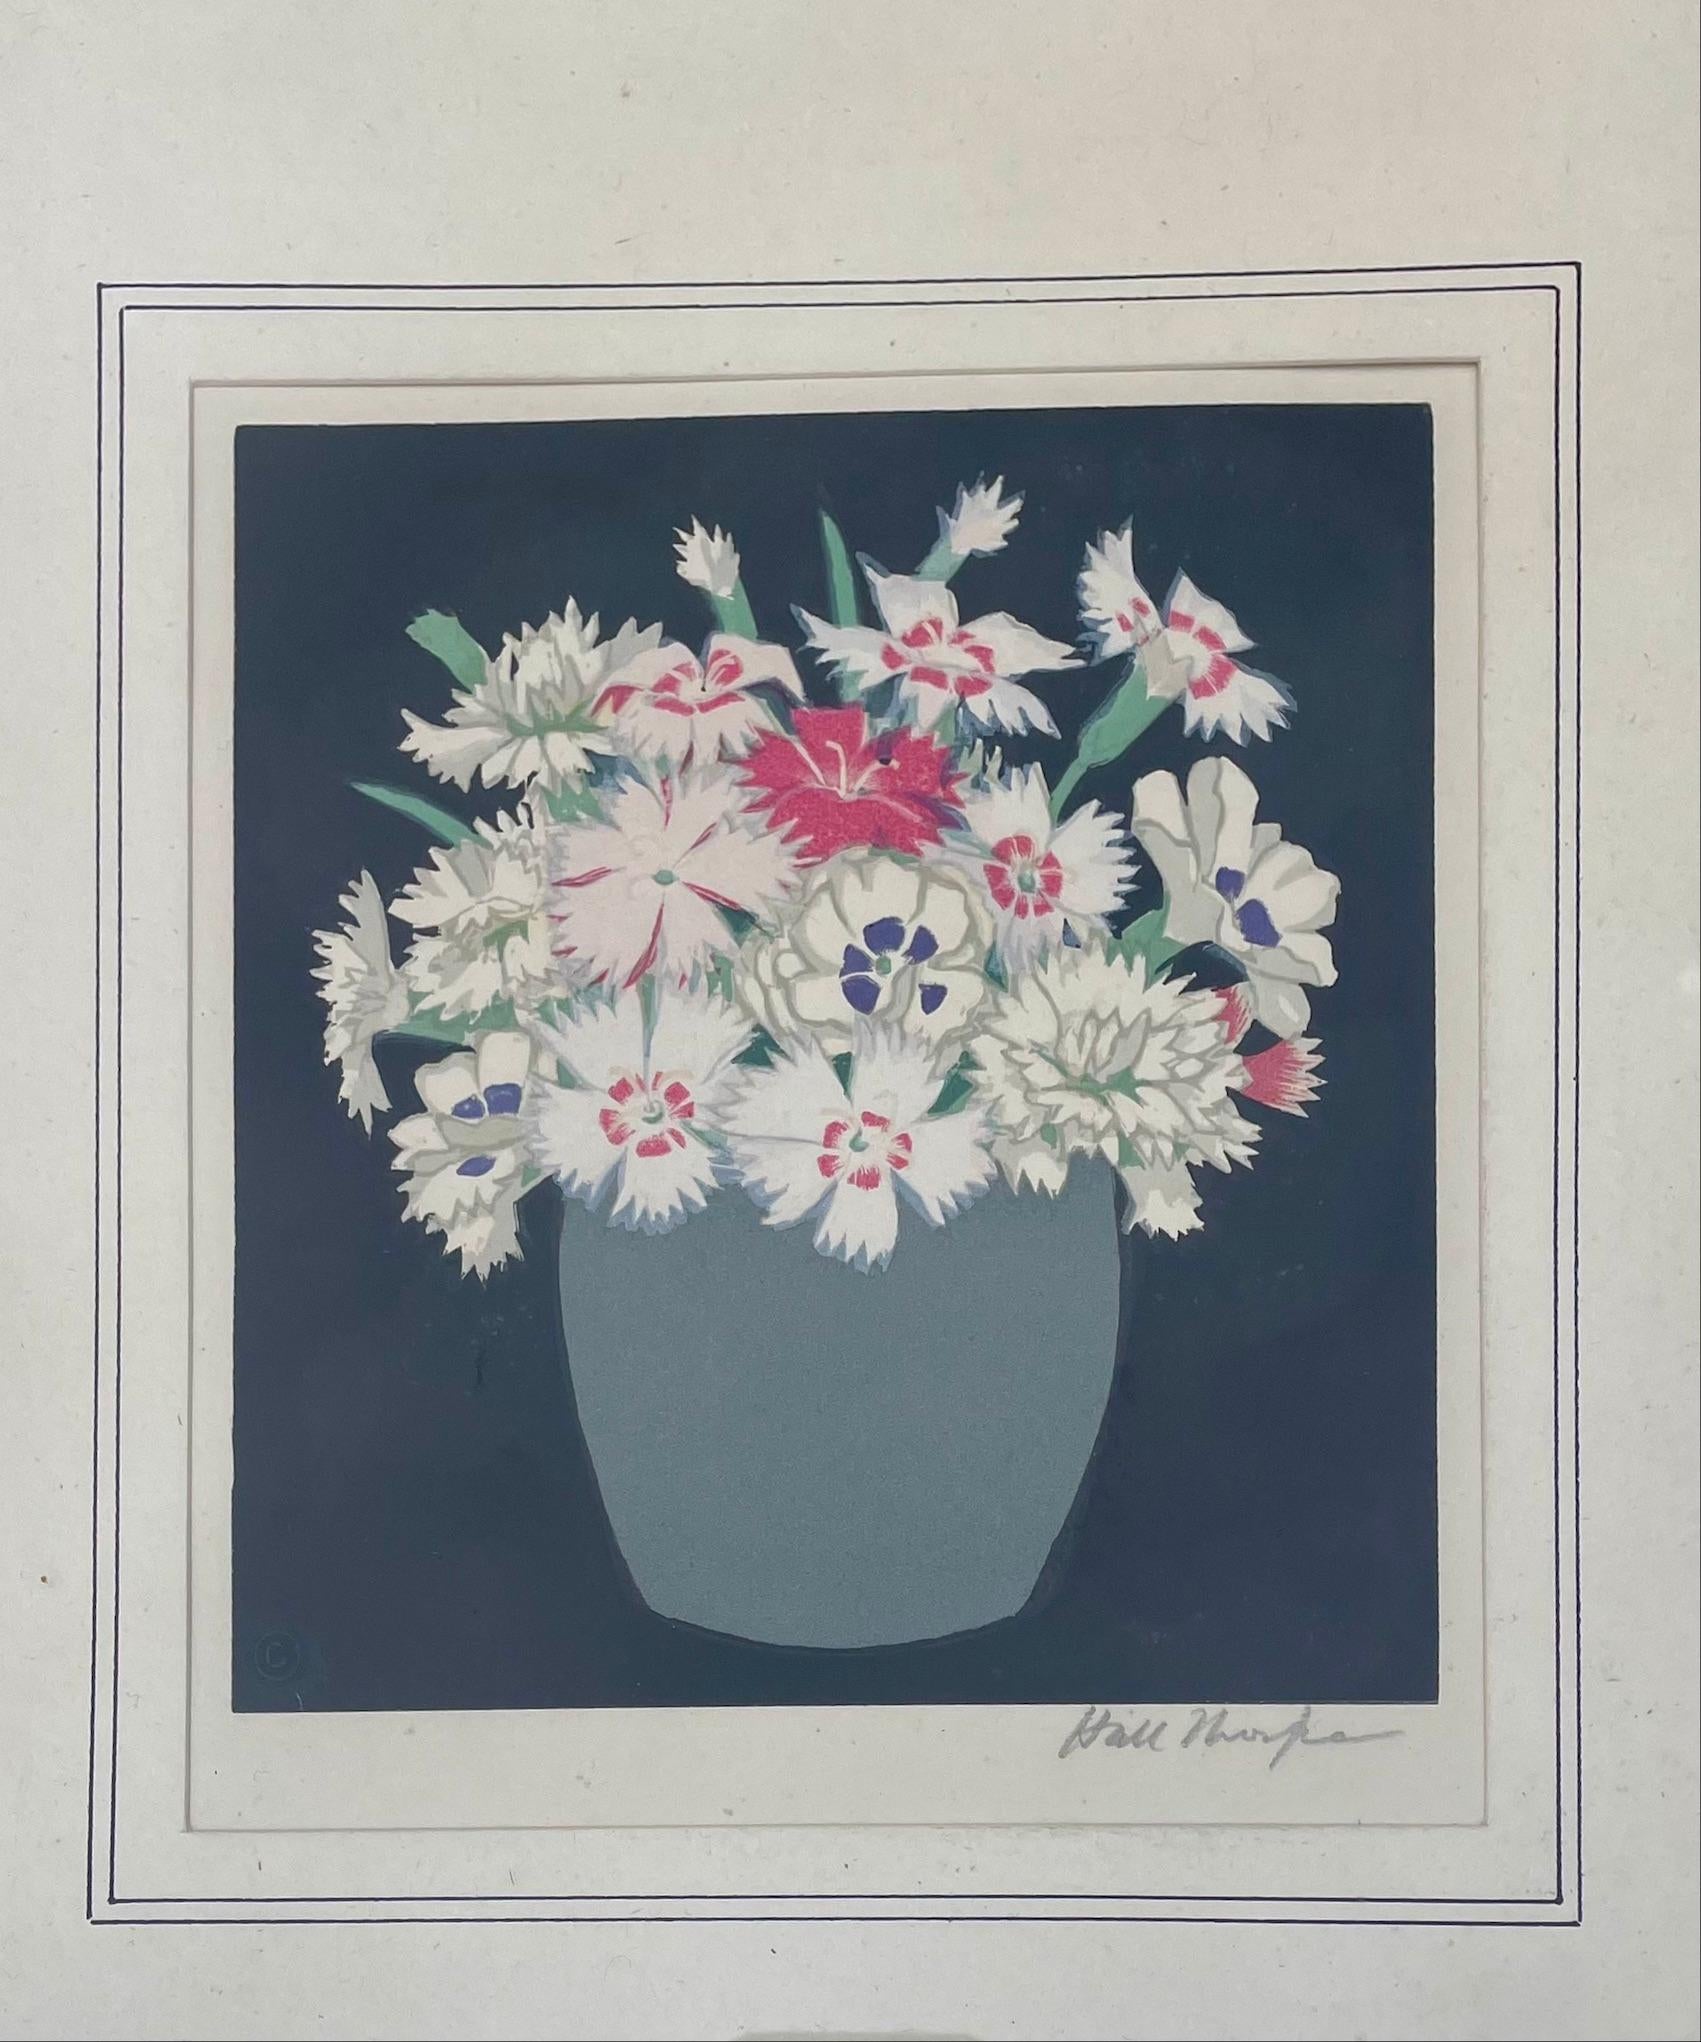 Twenties framed coloured wood-cut
‘Pinks’
By John Hall Thorpe - signed in pencil
Circa 1920s

Height 48.5cm   Width 34.5cm 

John Hall Thorpe (1874-1947) was an Australian artist who emigrated to England in 1900.   He was well known for his stylised